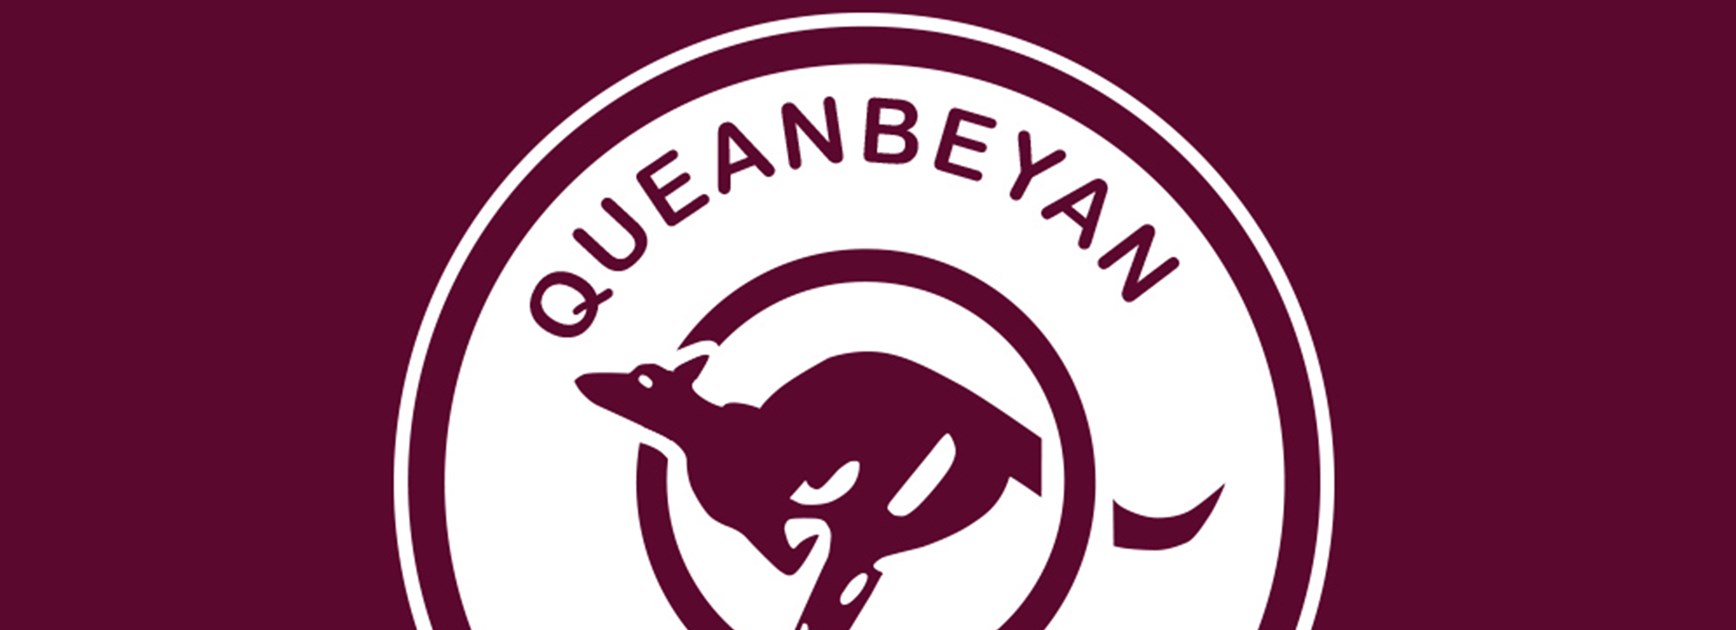 Female players wanted: Queanbeyan Roos Juniors